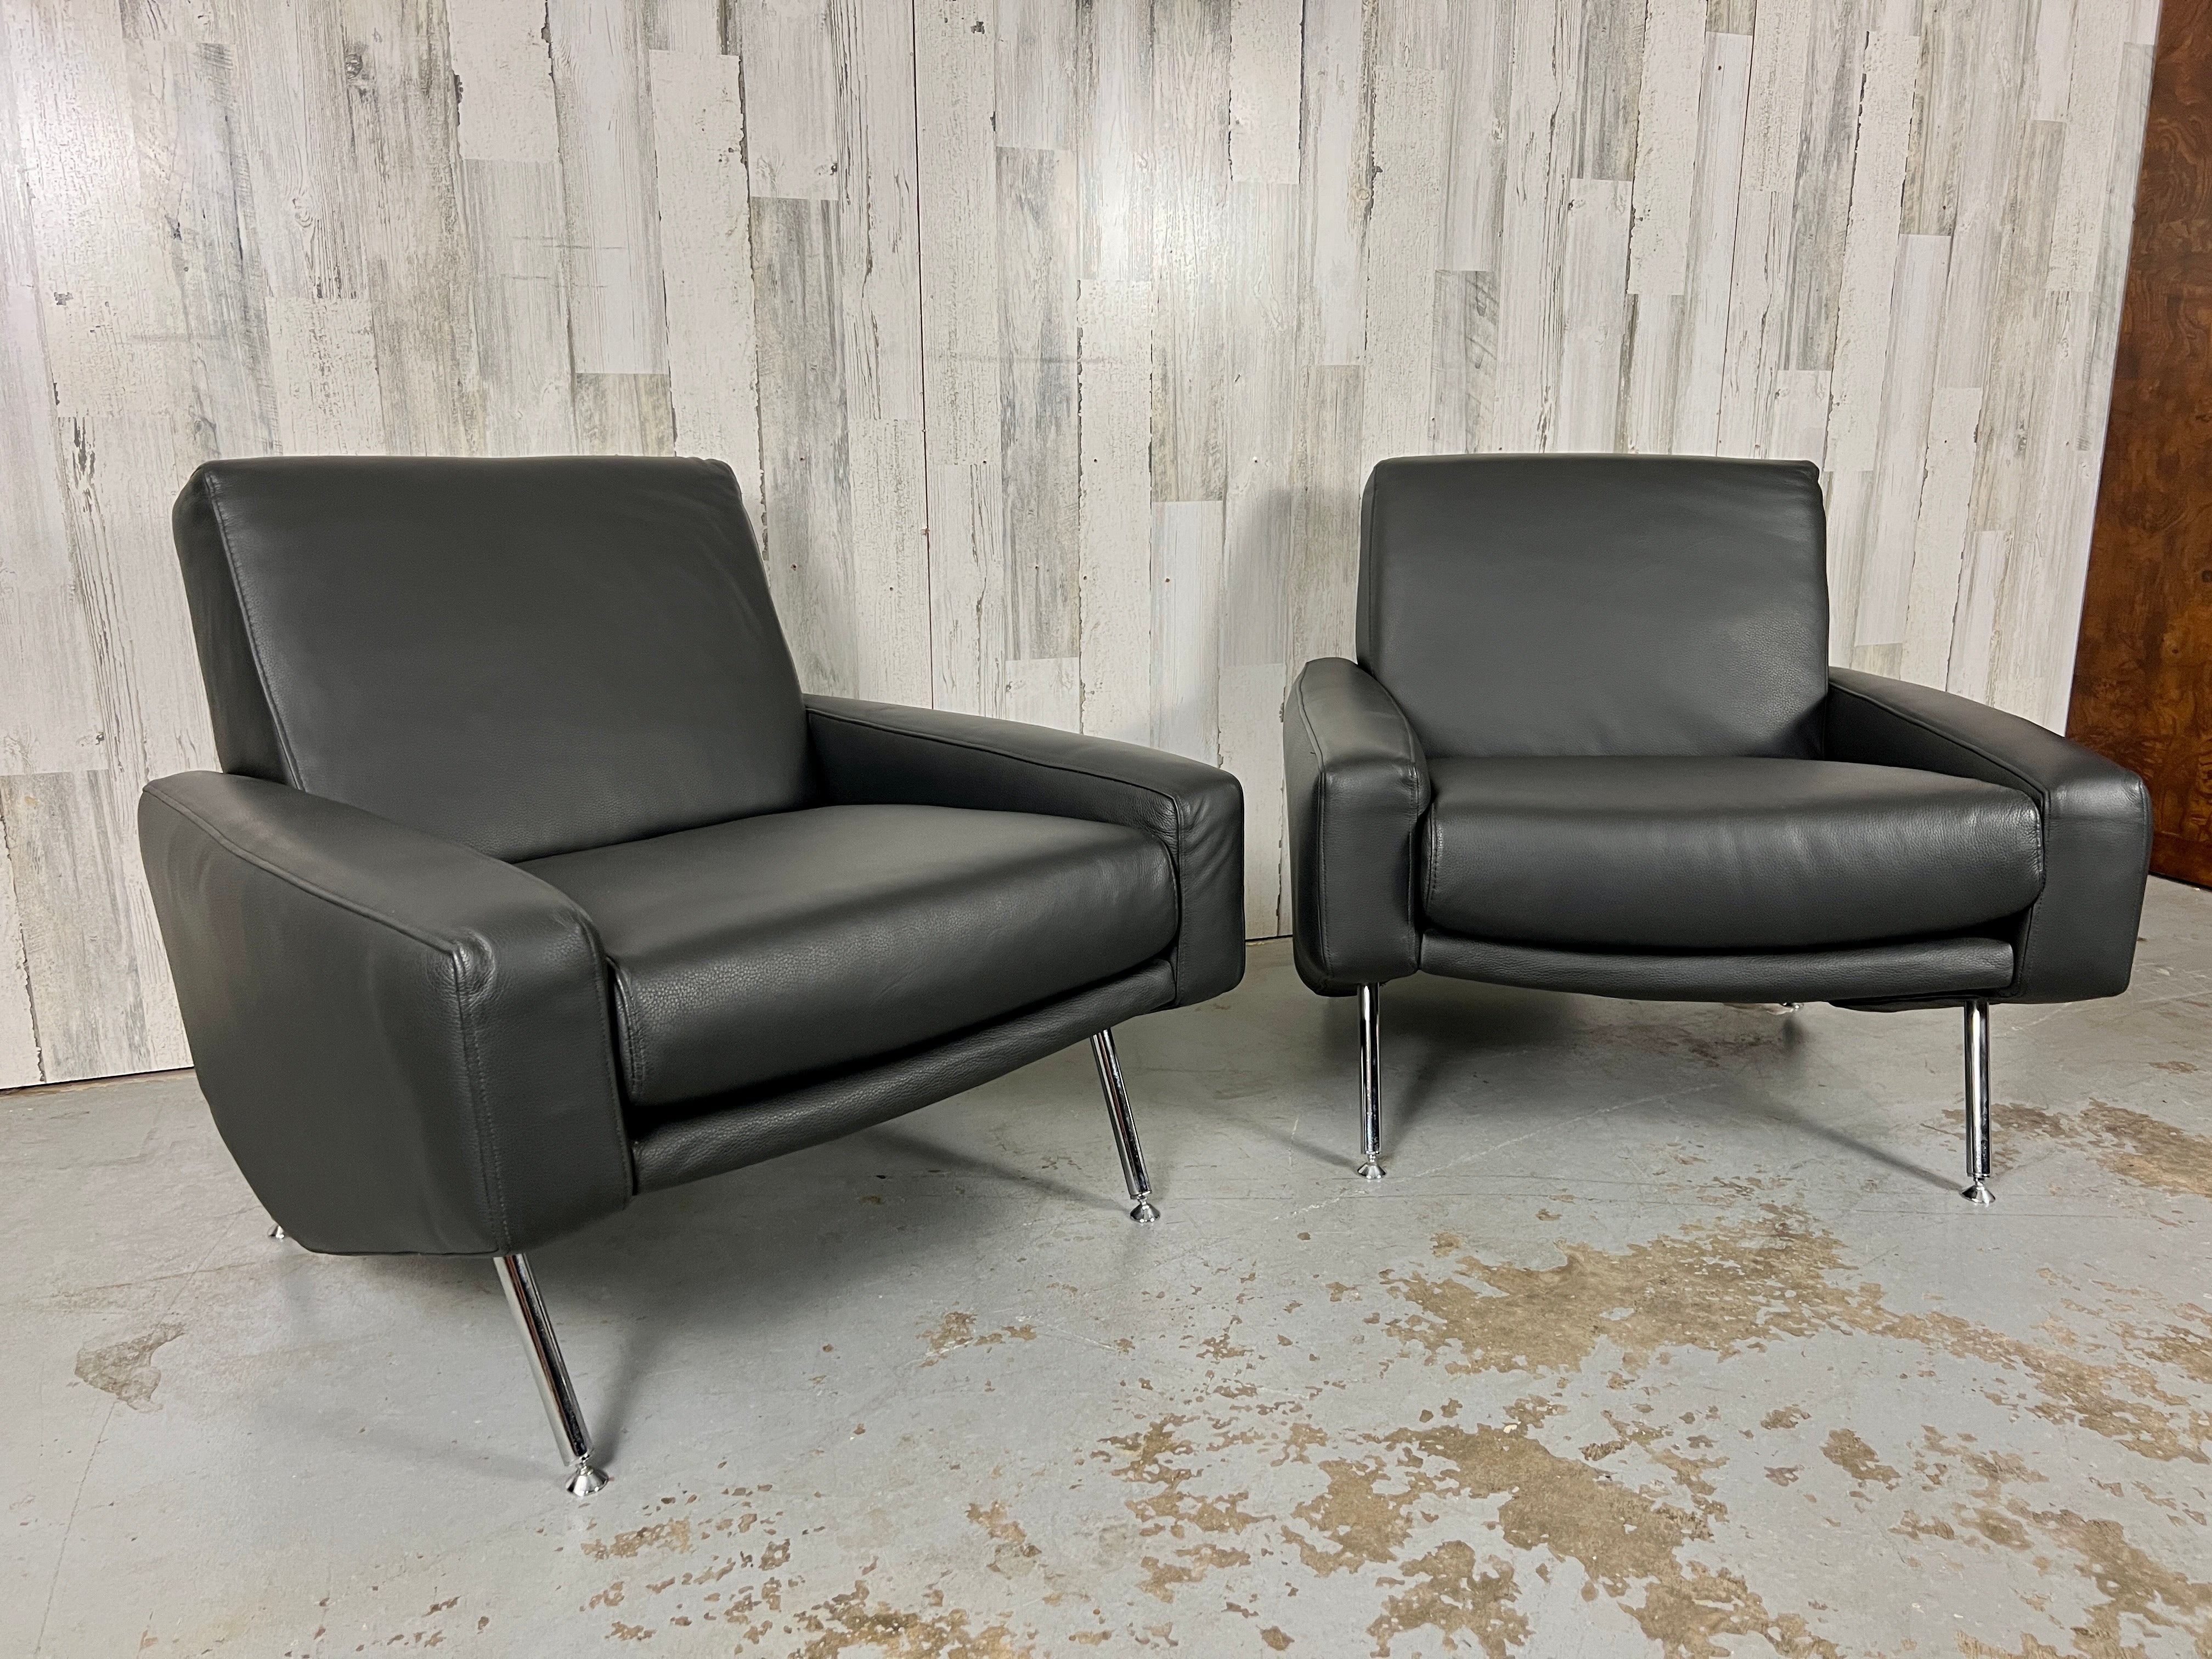 Pair of black leather with chrome chairs lounge chairs by Airborne, France.